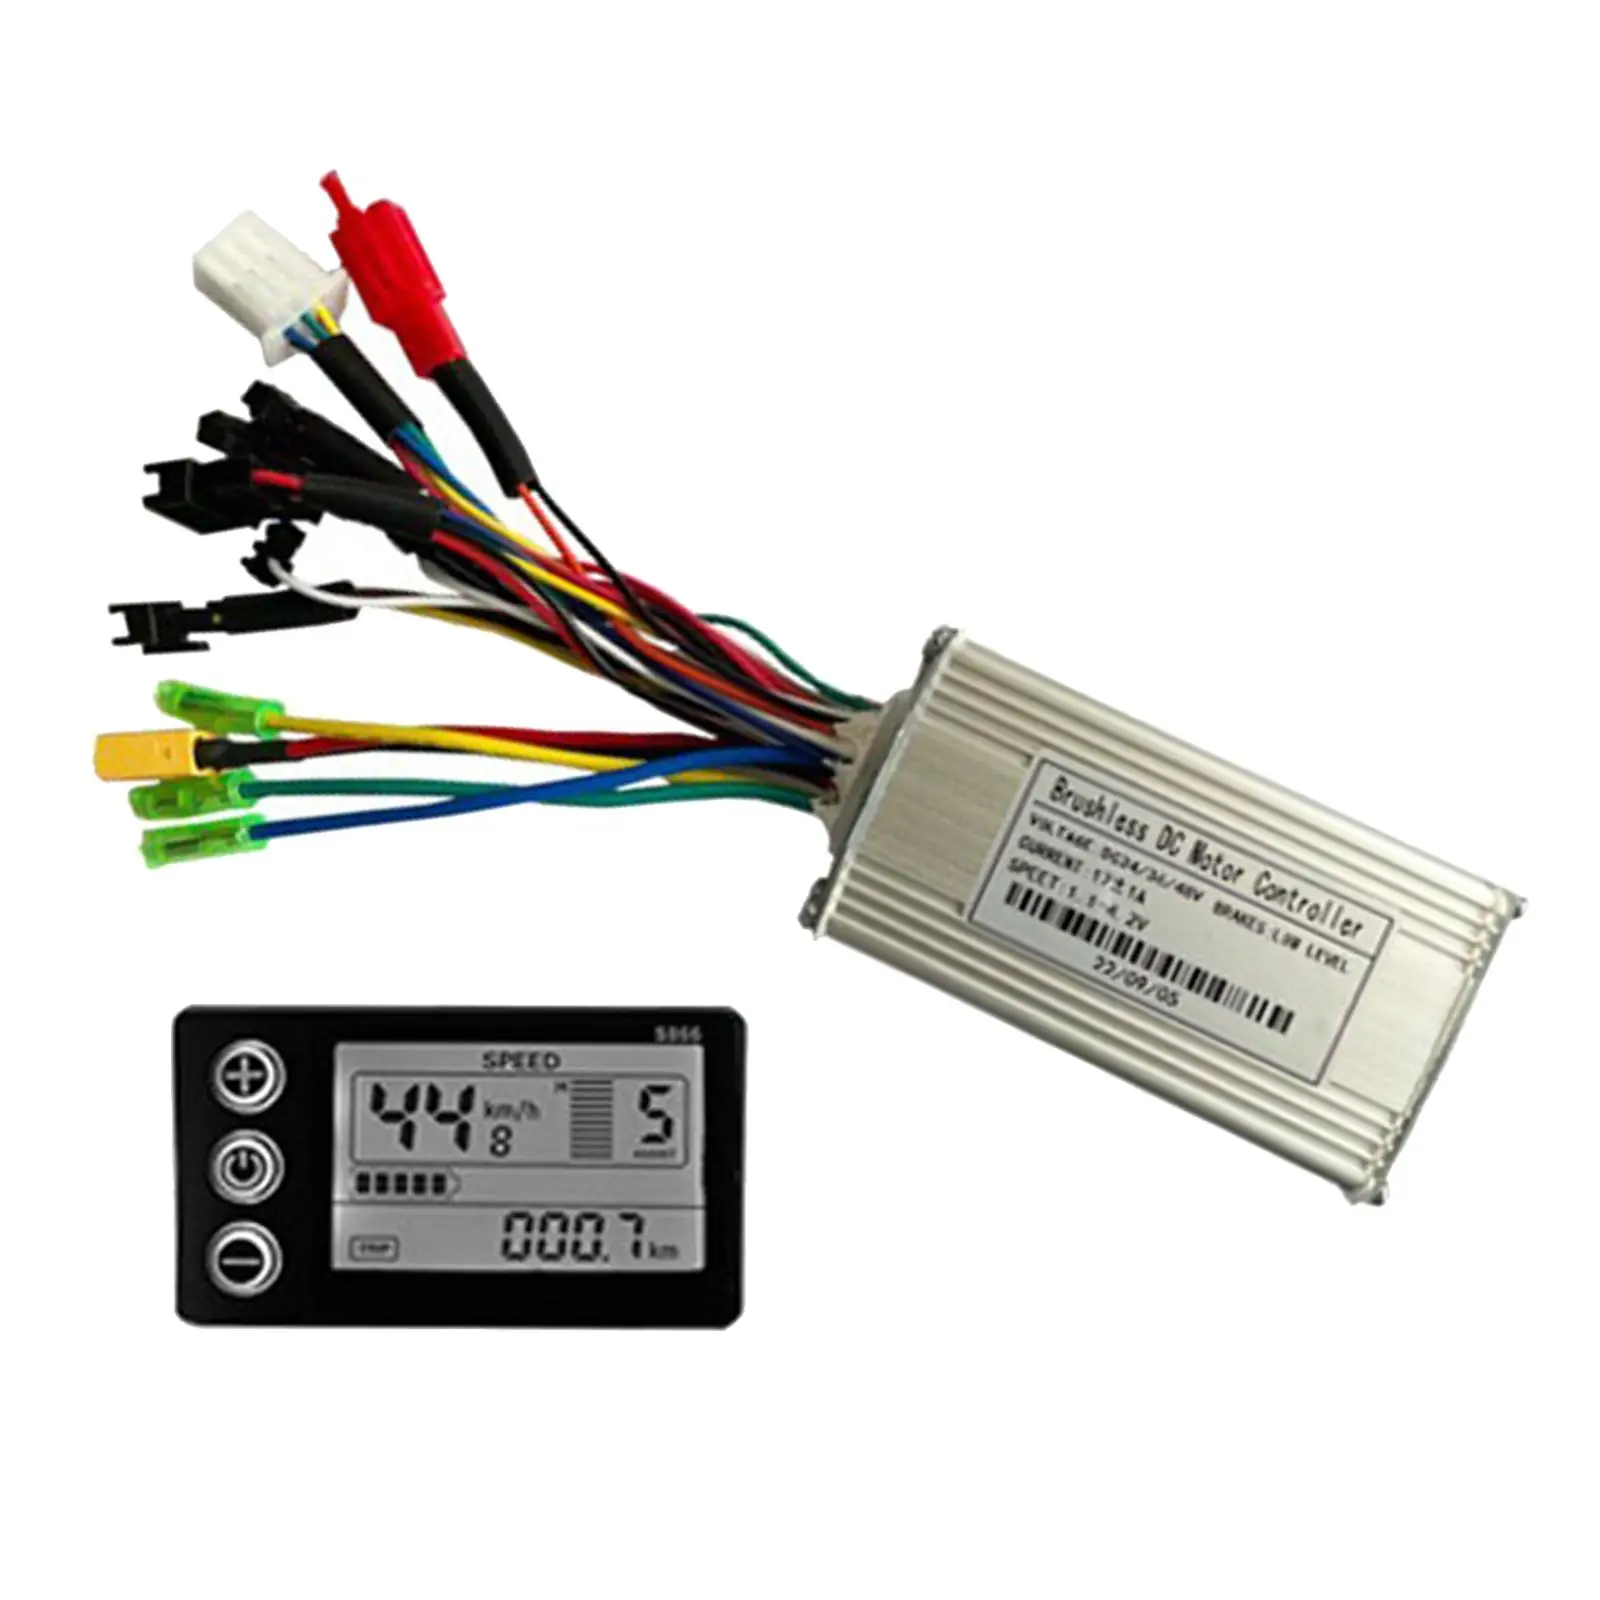 Motor Brushless Controller LCD Display DIY with Display Accessories for Electric